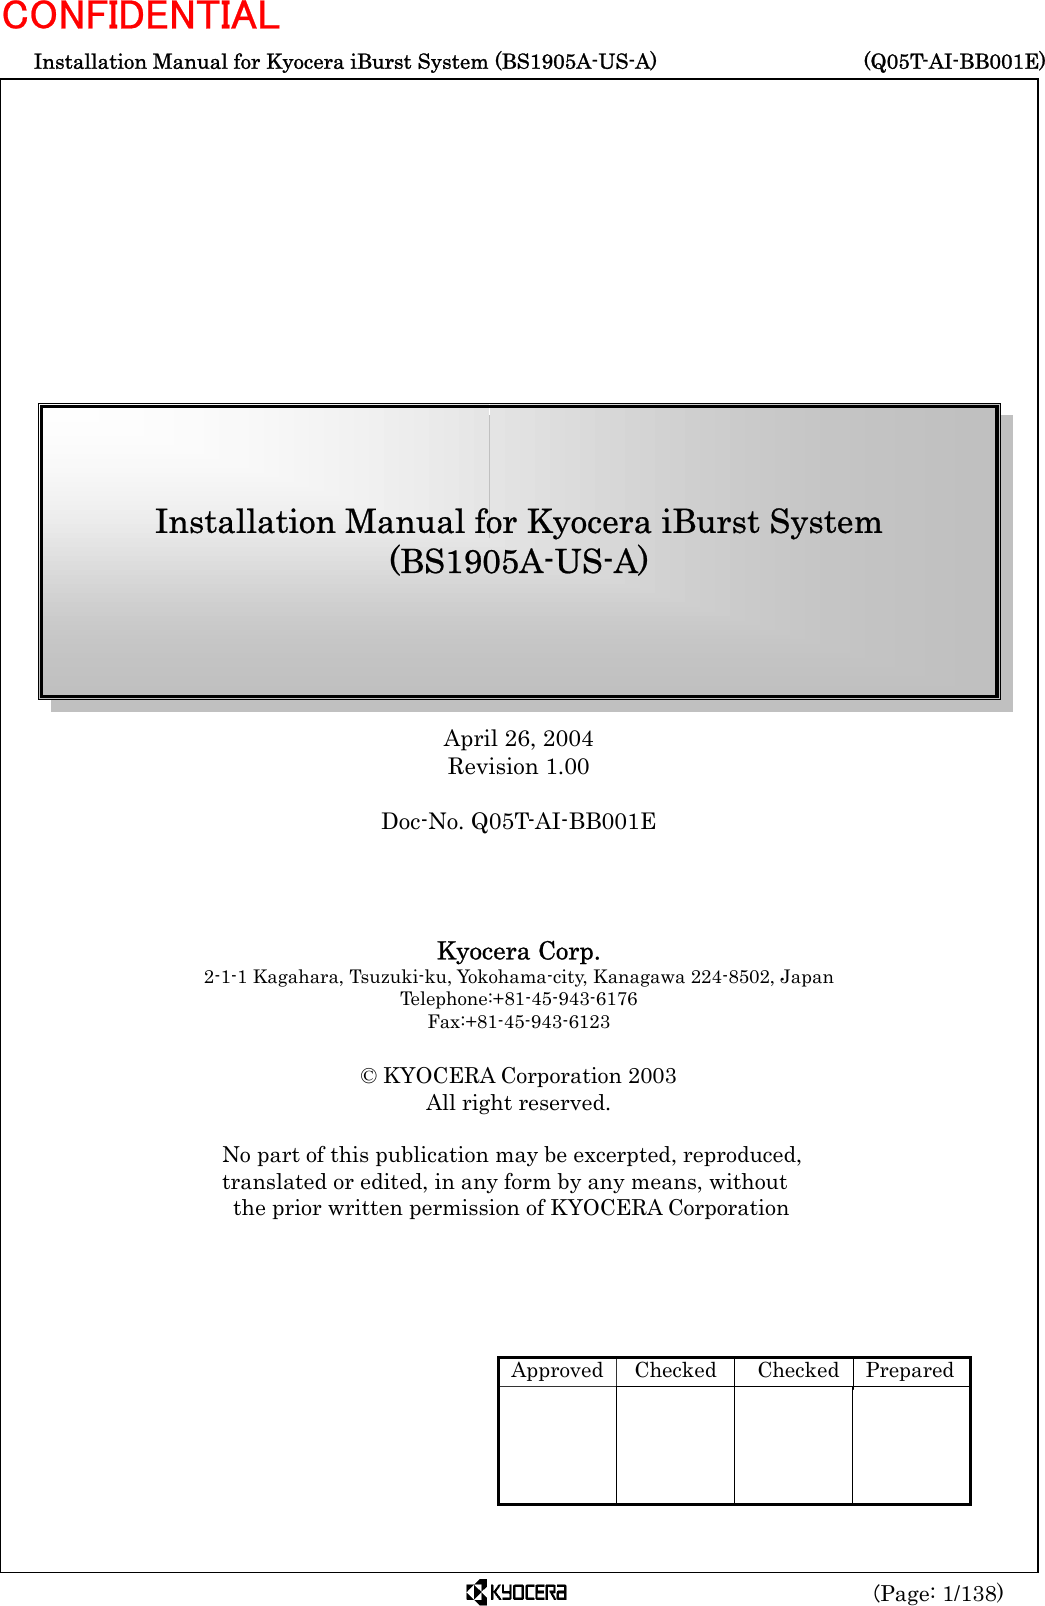  Installation Manual for Kyocera iBurst System (BS1905A-US-A)     (Q05T-AI-BB001E) (Page: 1/138) CONFIDENTIAL                April 26, 2004 Revision 1.00  Doc-No. Q05T-AI-BB001E     Kyocera Corp. 2-1-1 Kagahara, Tsuzuki-ku, Yokohama-city, Kanagawa 224-8502, Japan       Telephone:+81-45-943-6176 Fax:+81-45-943-6123  © KYOCERA Corporation 2003 All right reserved.  No part of this publication may be excerpted, reproduced,   translated or edited, in any form by any means, without   the prior written permission of KYOCERA Corporation      Installation Manual for Kyocera iBurst System (BS1905A-US-A) Approved  Checked Checked Prepared